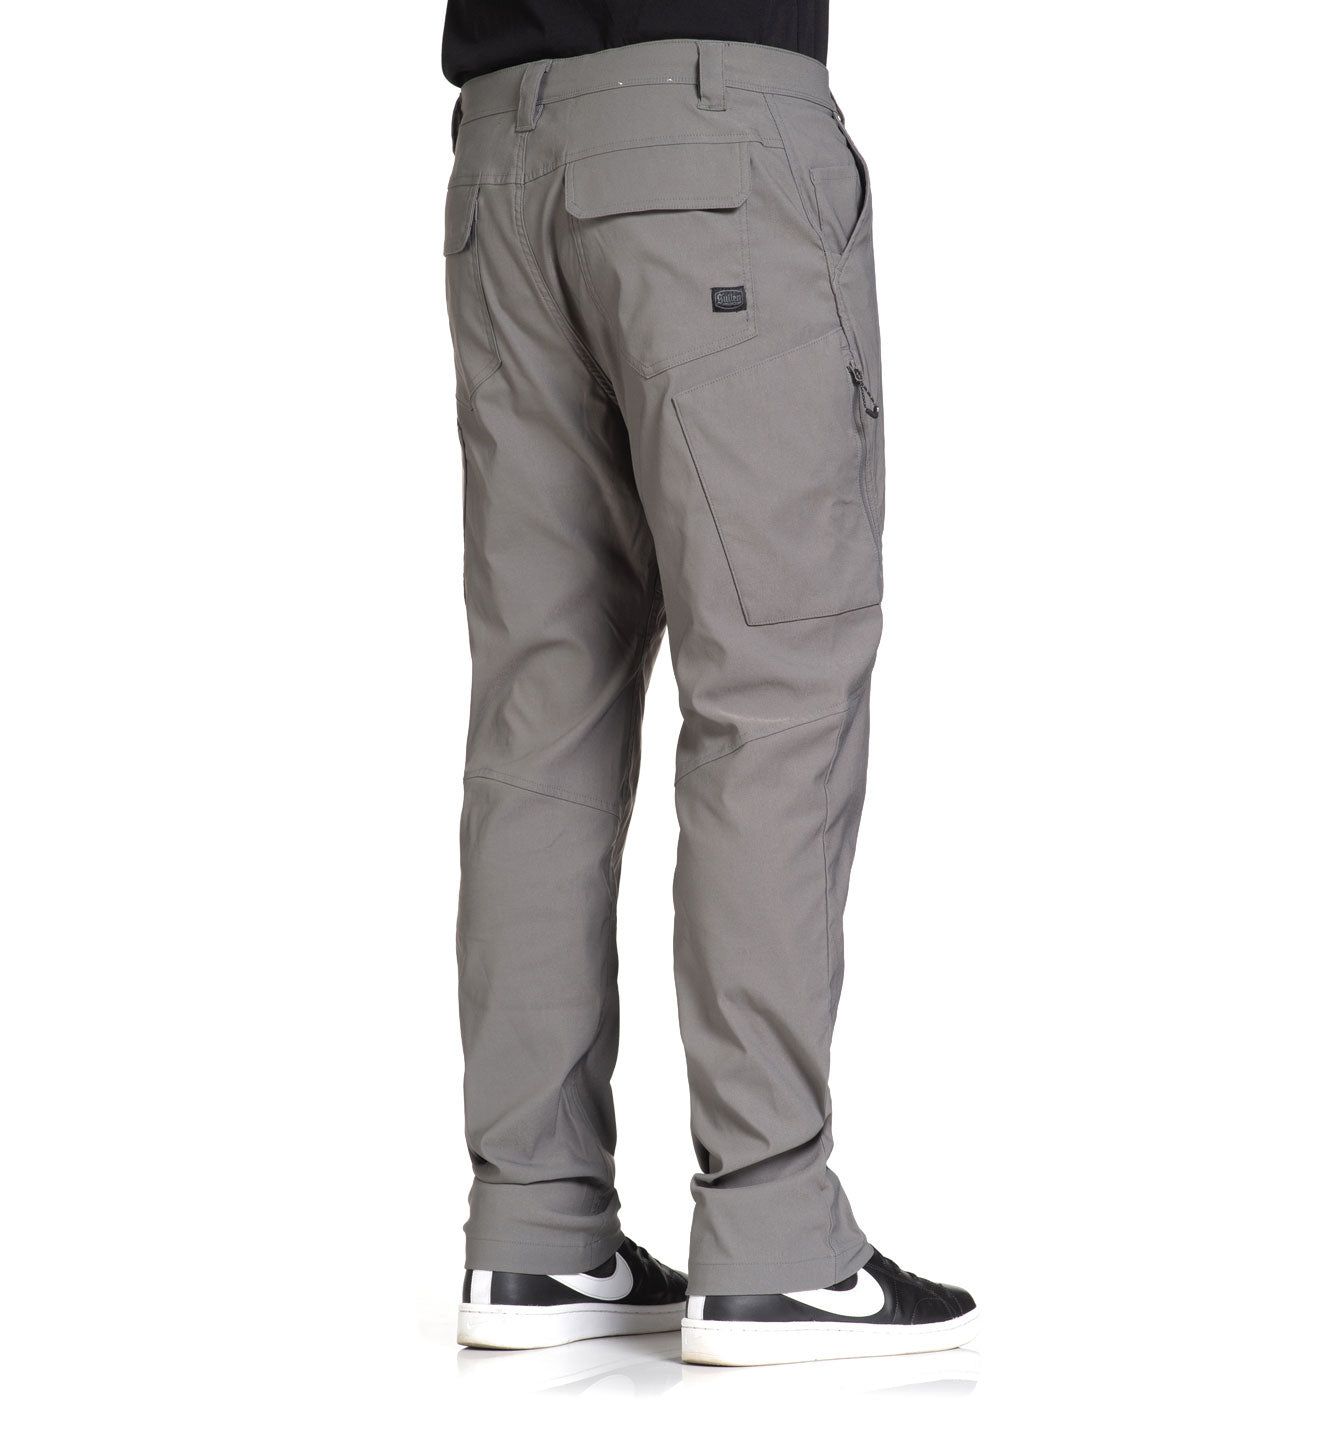 Expedition Stretch Cargo Pants - Charcoal - 